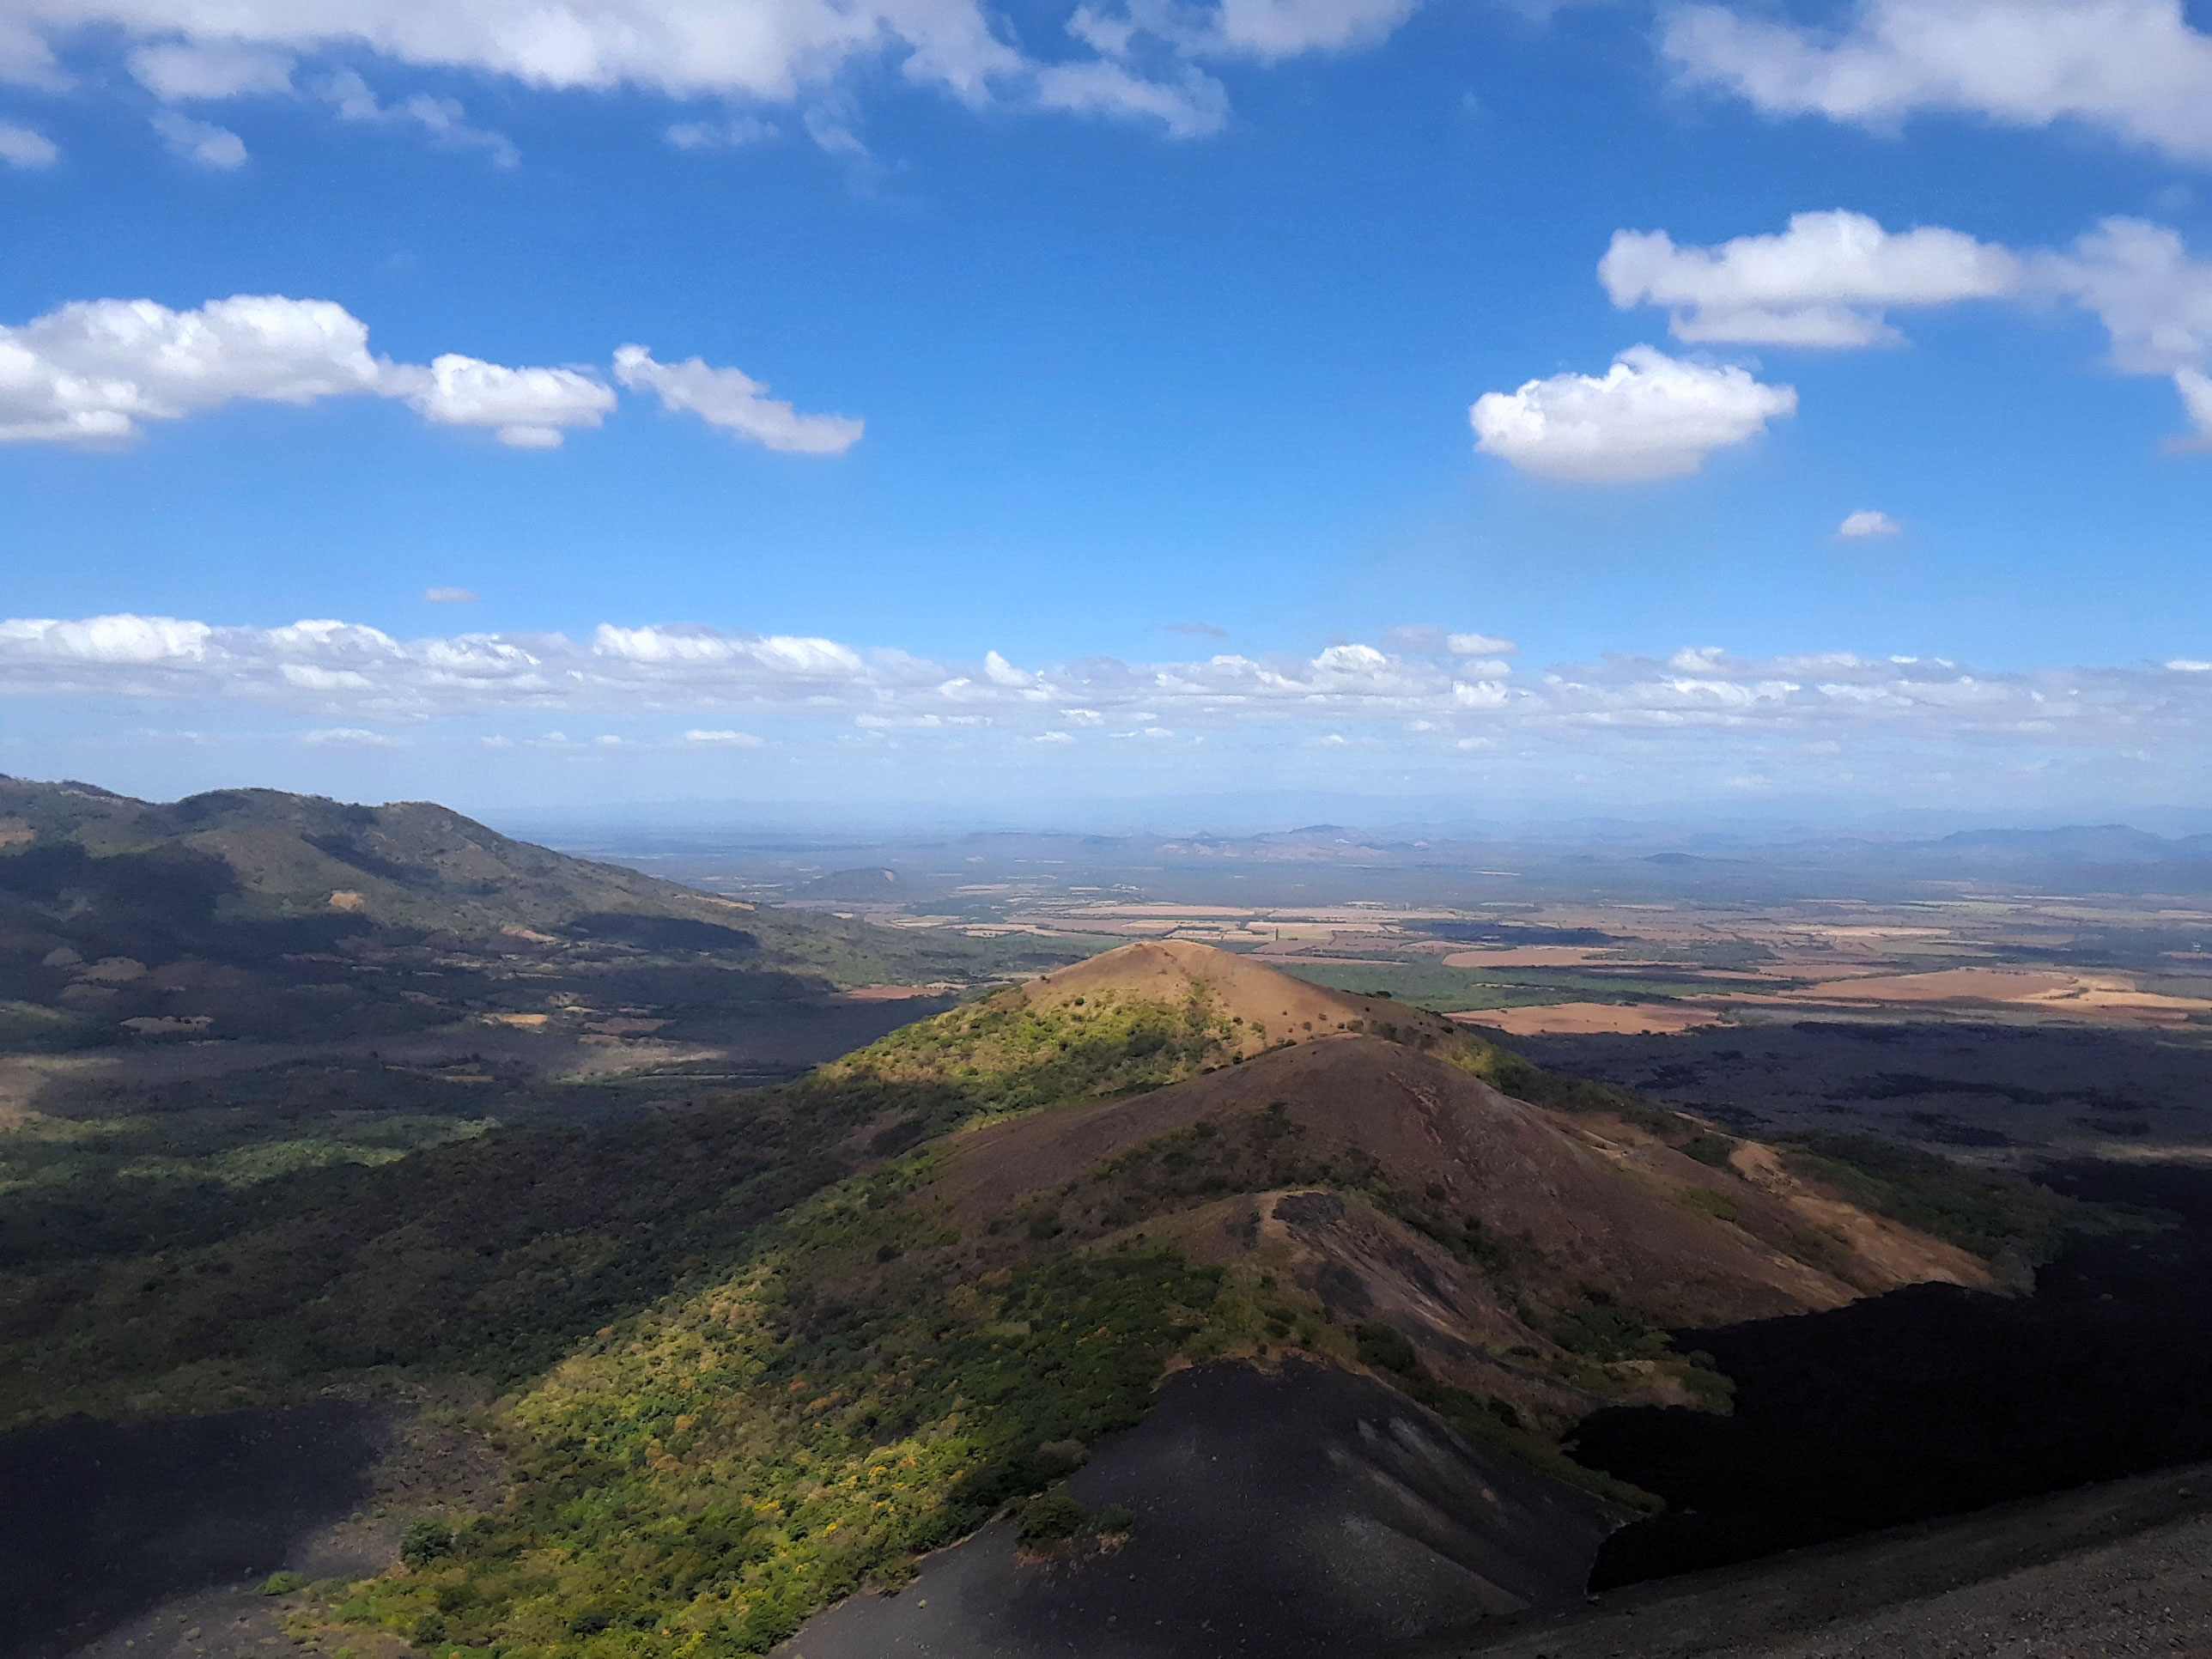 Cerro Negro (Black Hill) is one of the youngest cinder cone volcanoes in the workld